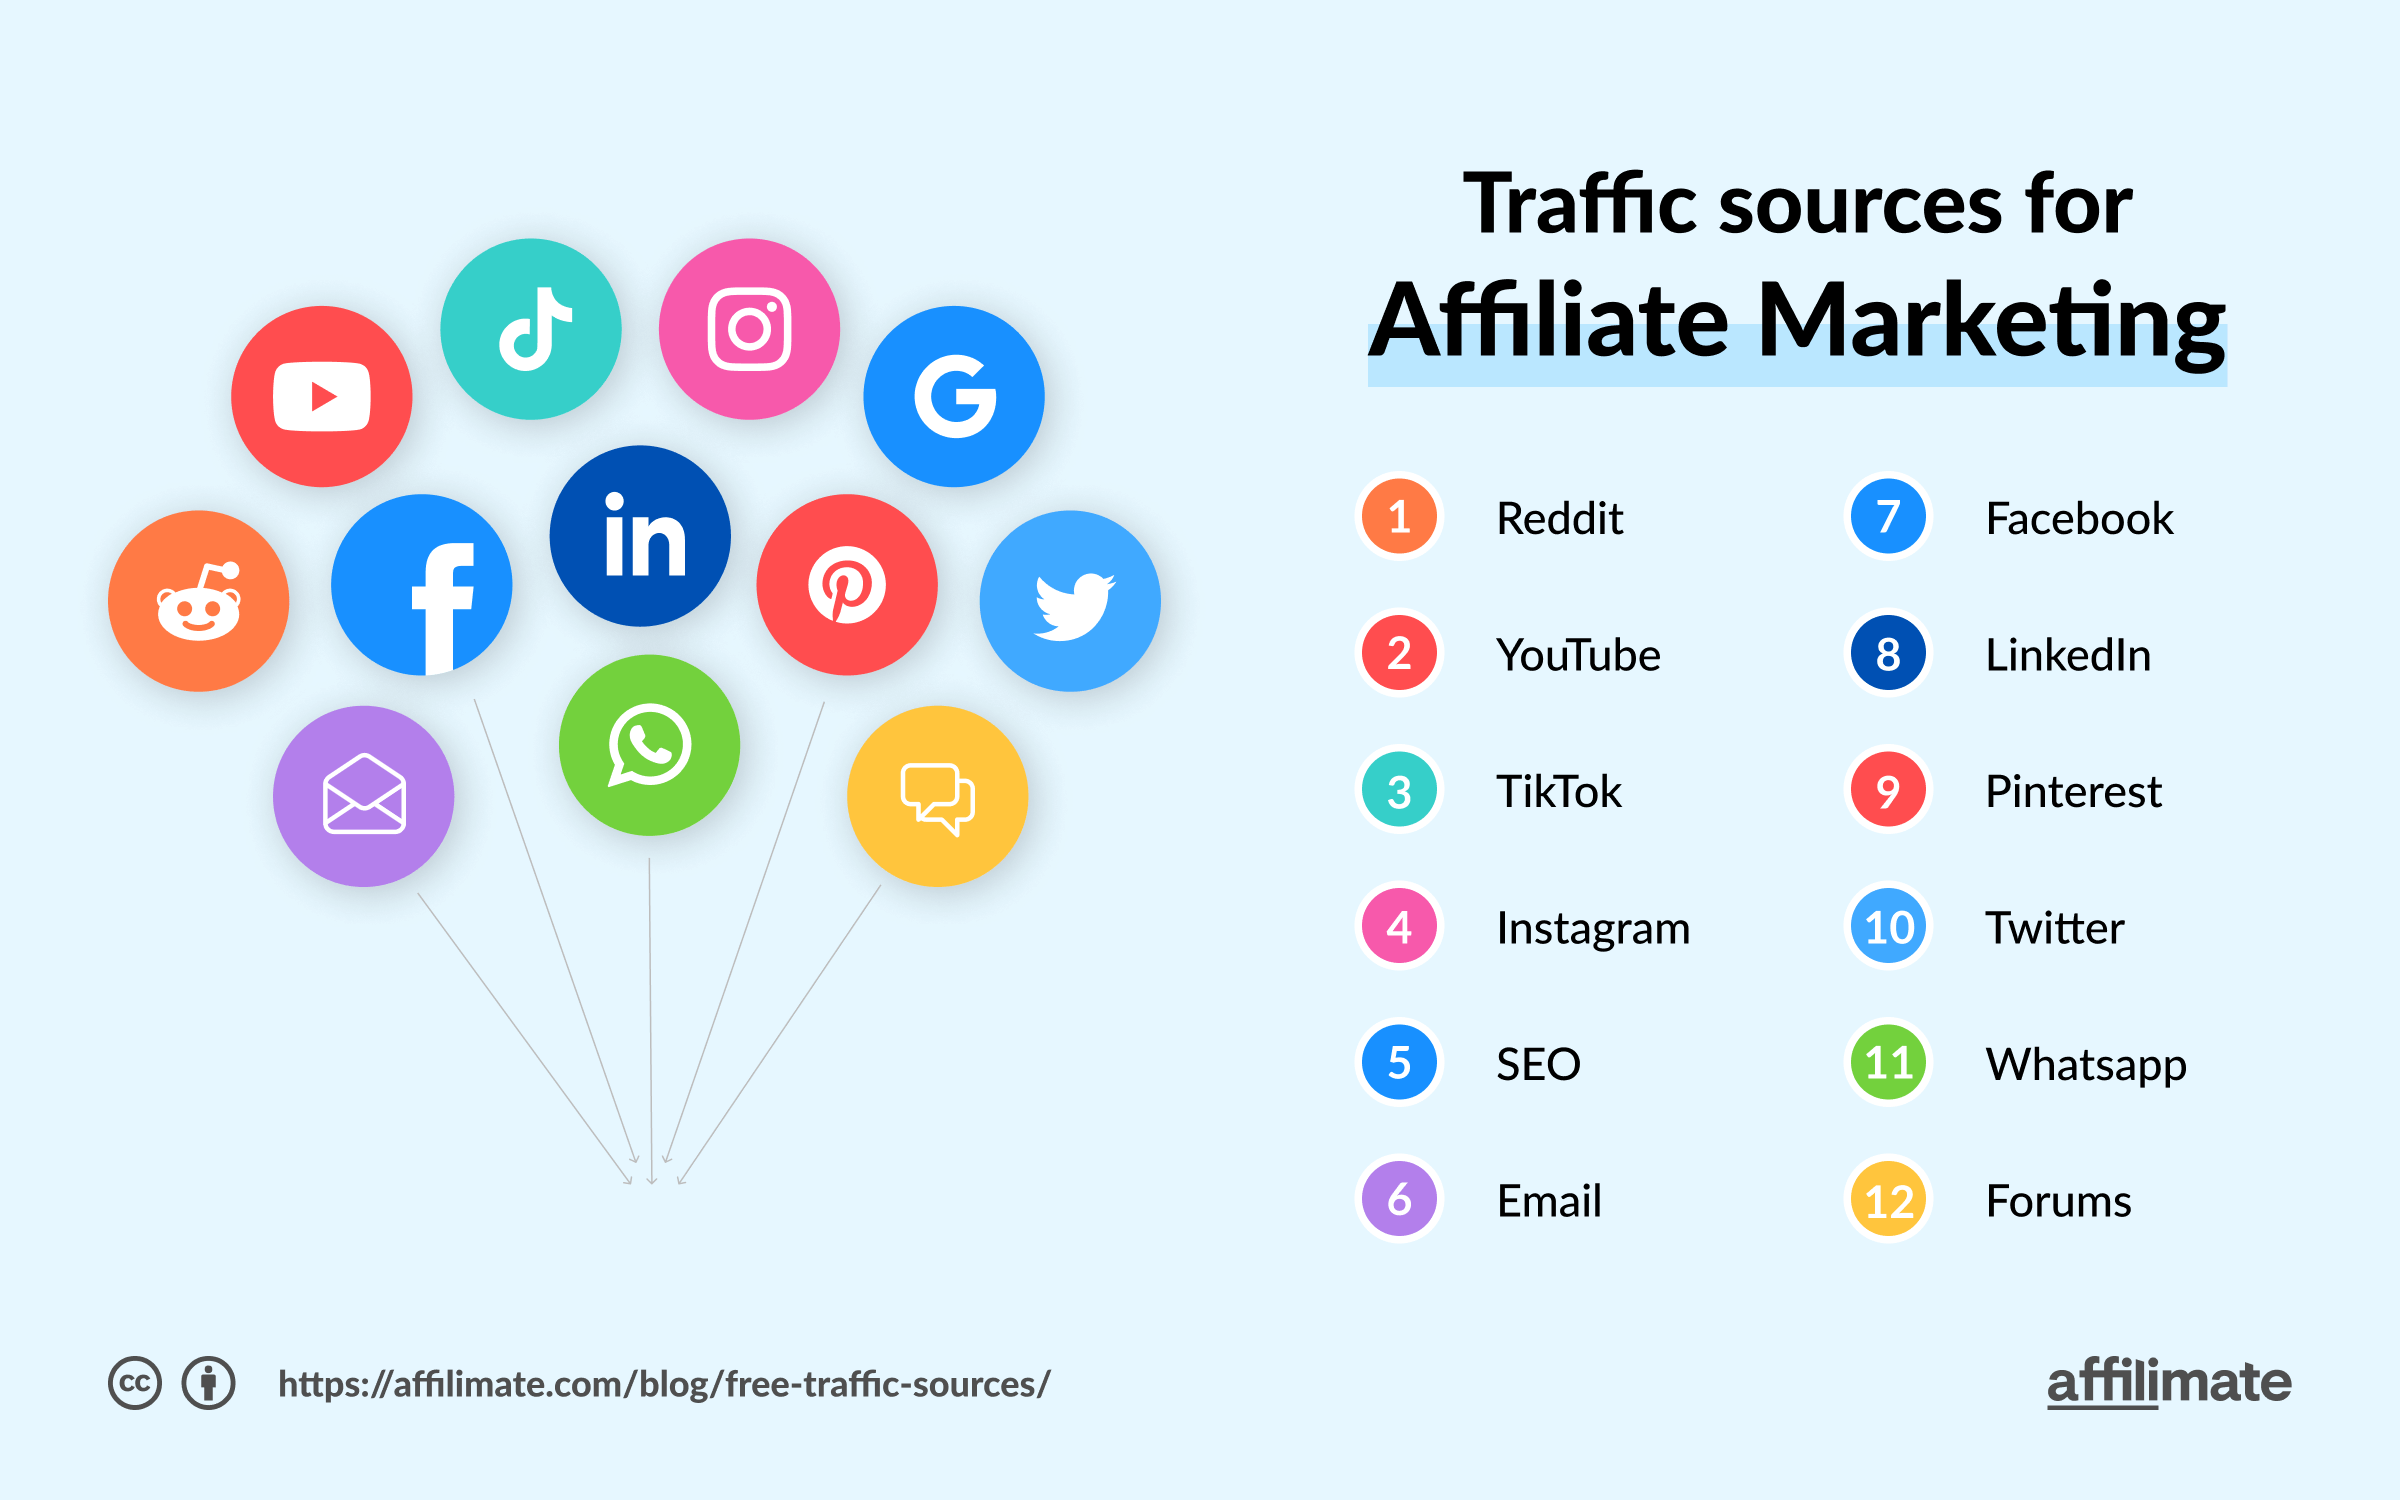 Free traffic sources for affiliate marketing